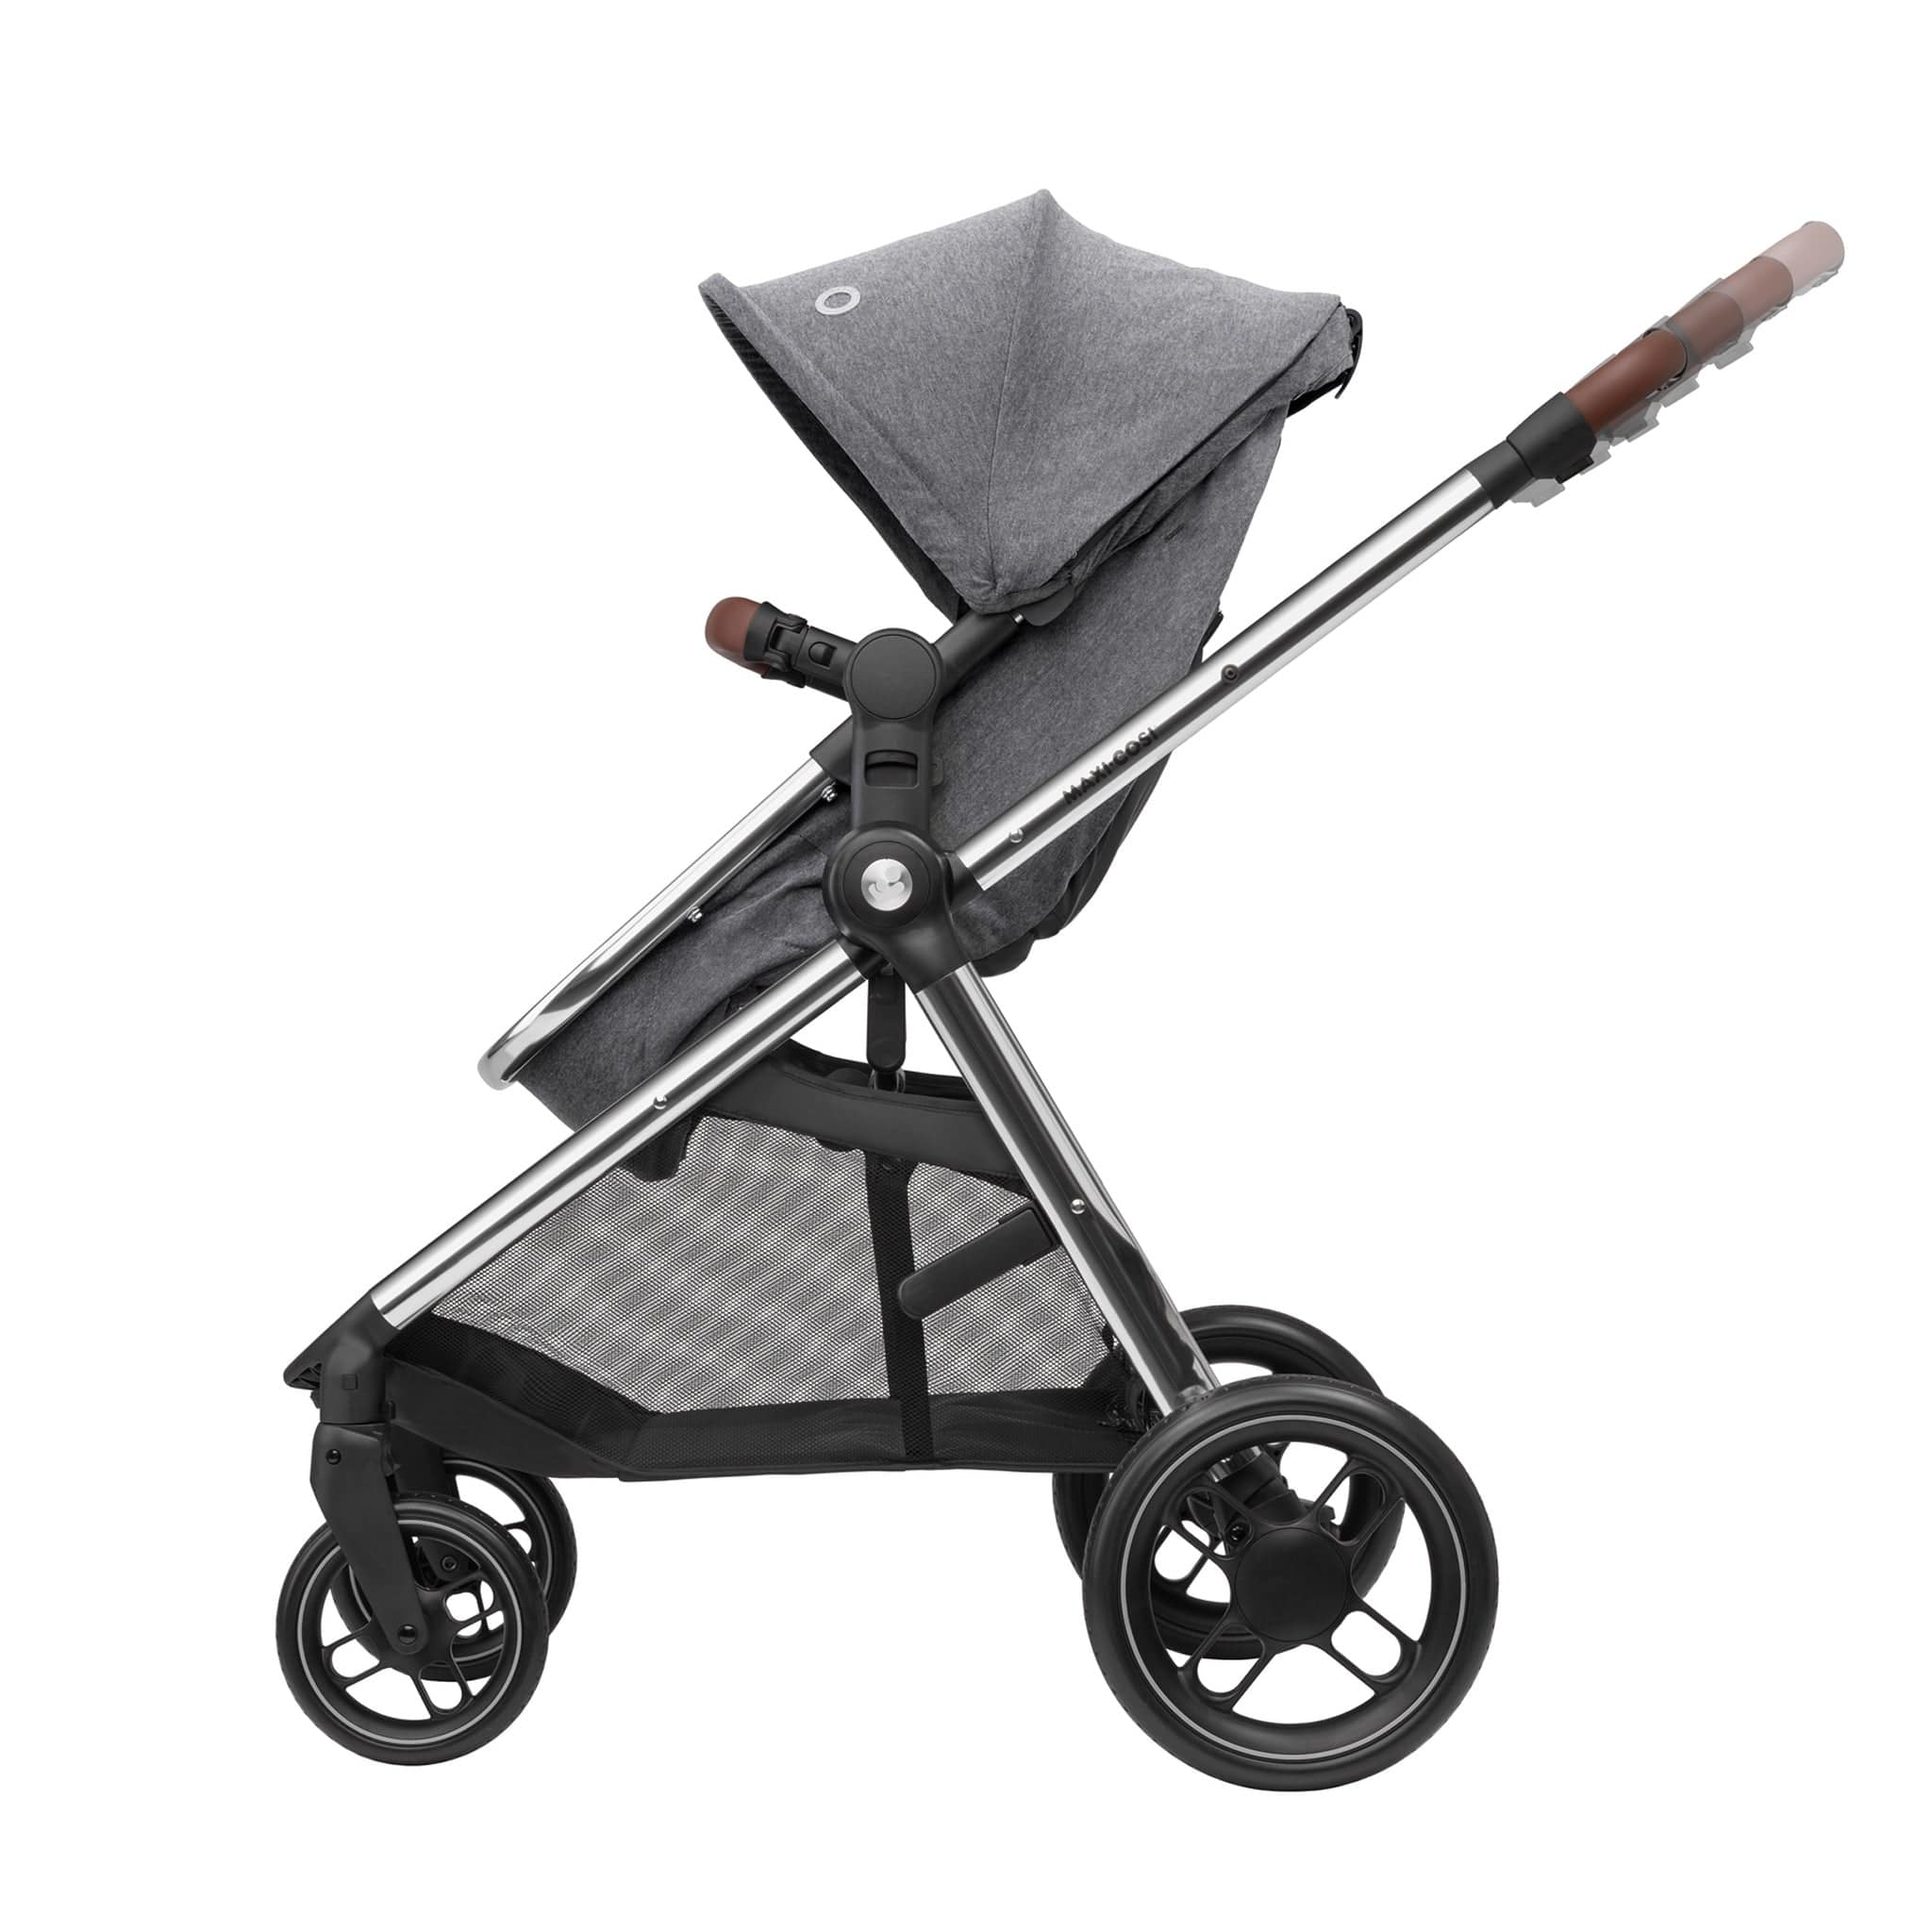 Maxi-Cosi travel systems Maxi-Cosi Zelia Luxe with Cabriofix i-Size Travel System in Twillic Grey 11075-TWI-GRY